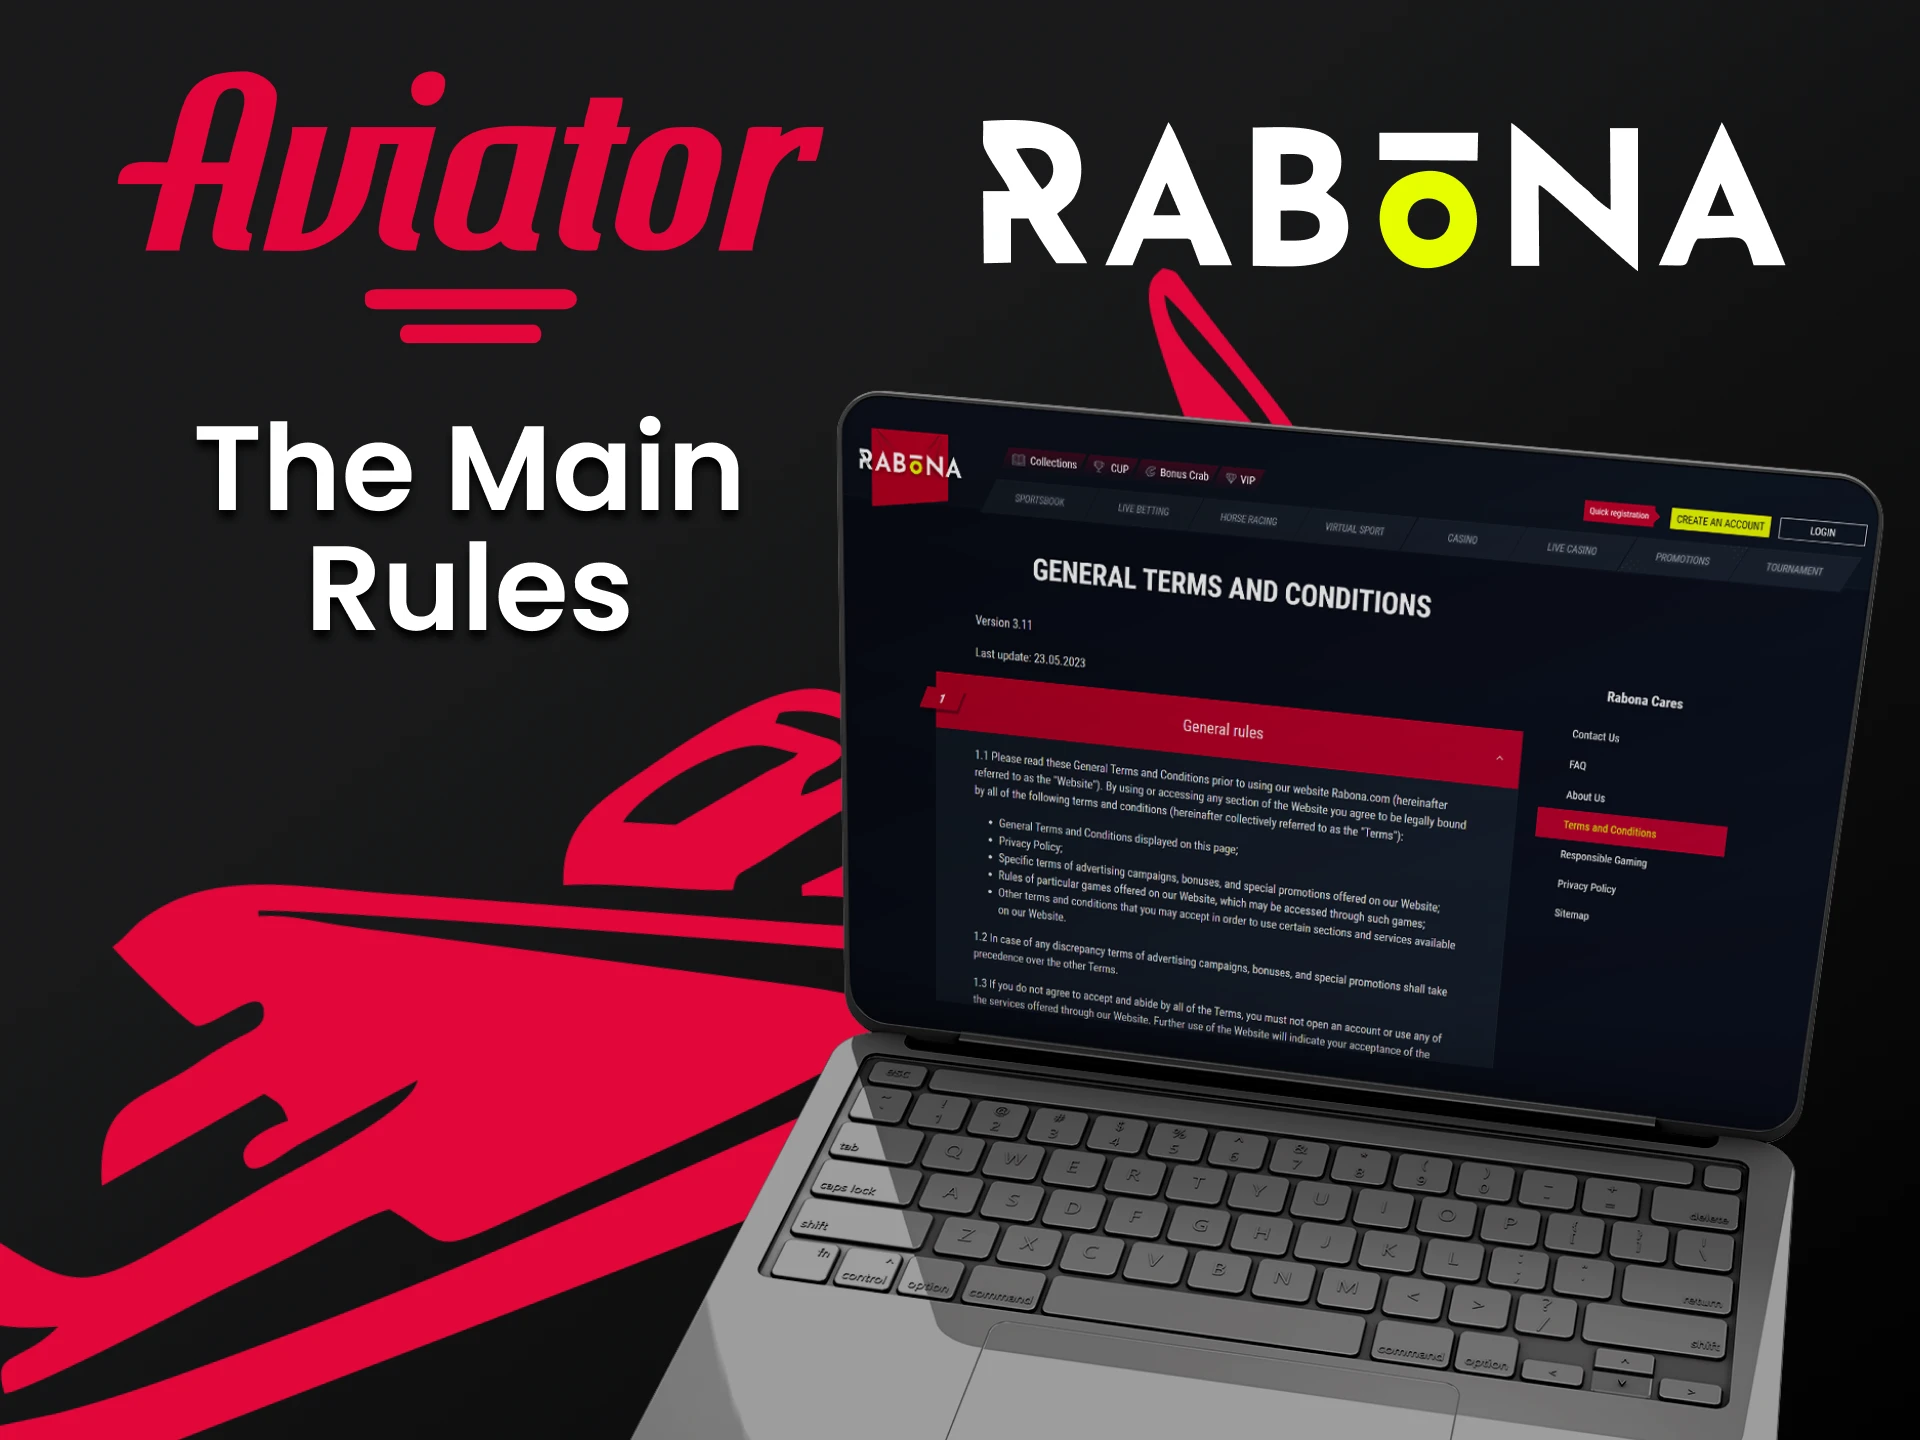 Learn about the rules of the Rabona site.